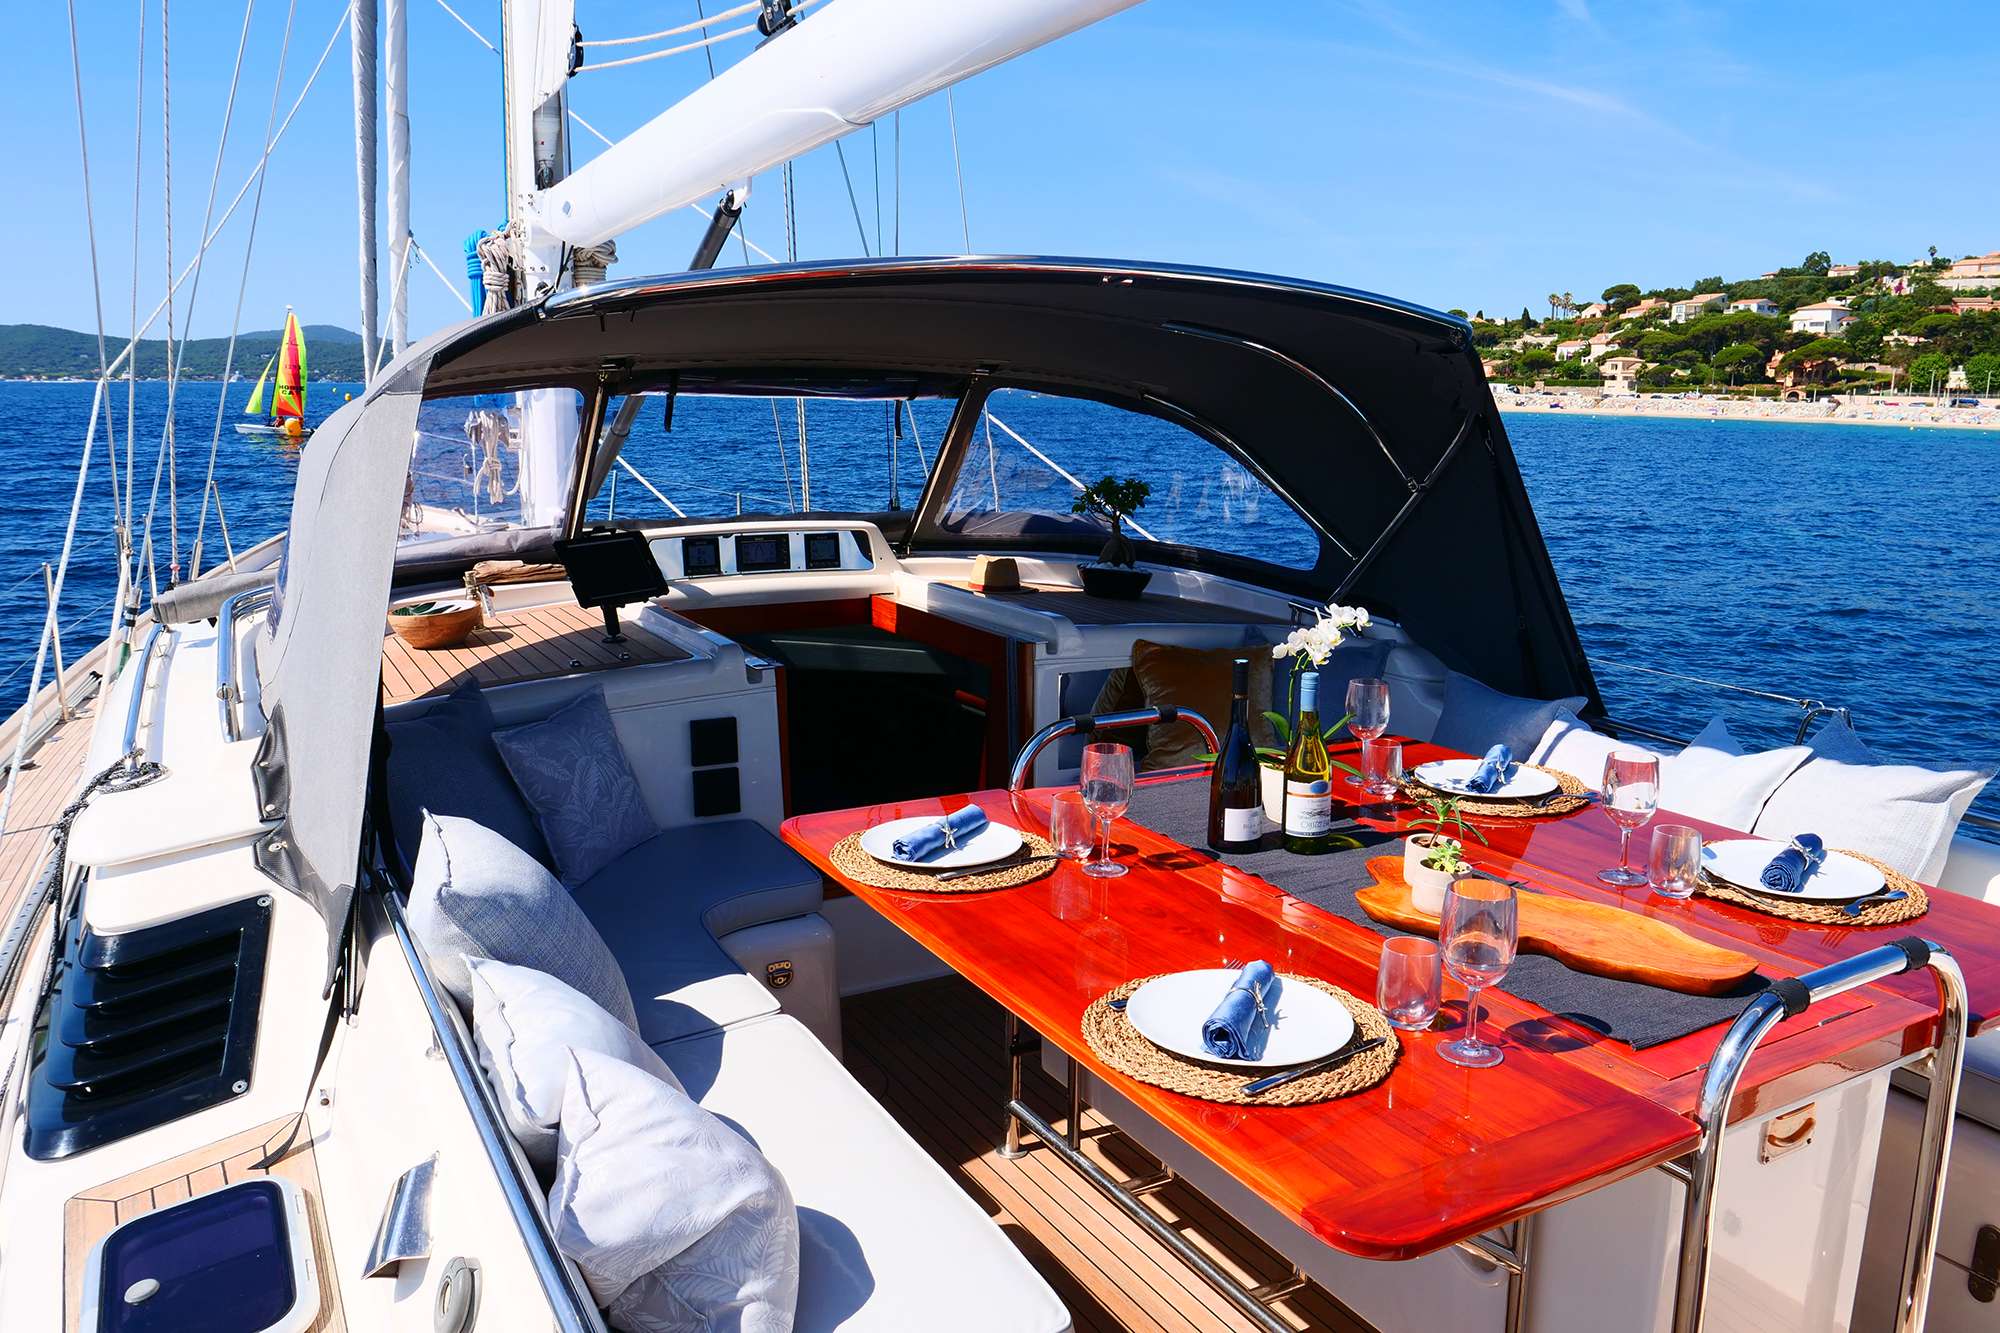 Sailing Yacht 'ELVIS MAGIC' Delightful upper deck dining, 6 PAX, 2 Crew, 66.00 Ft, 20.00 Meters, Built 2003, Oyster Marine, Refit Year 2012 - Main engine - Perkins Sabre 225ti 2016 - Generator - Northern lights 11kw, Bow thruster hydraulic motor and blade